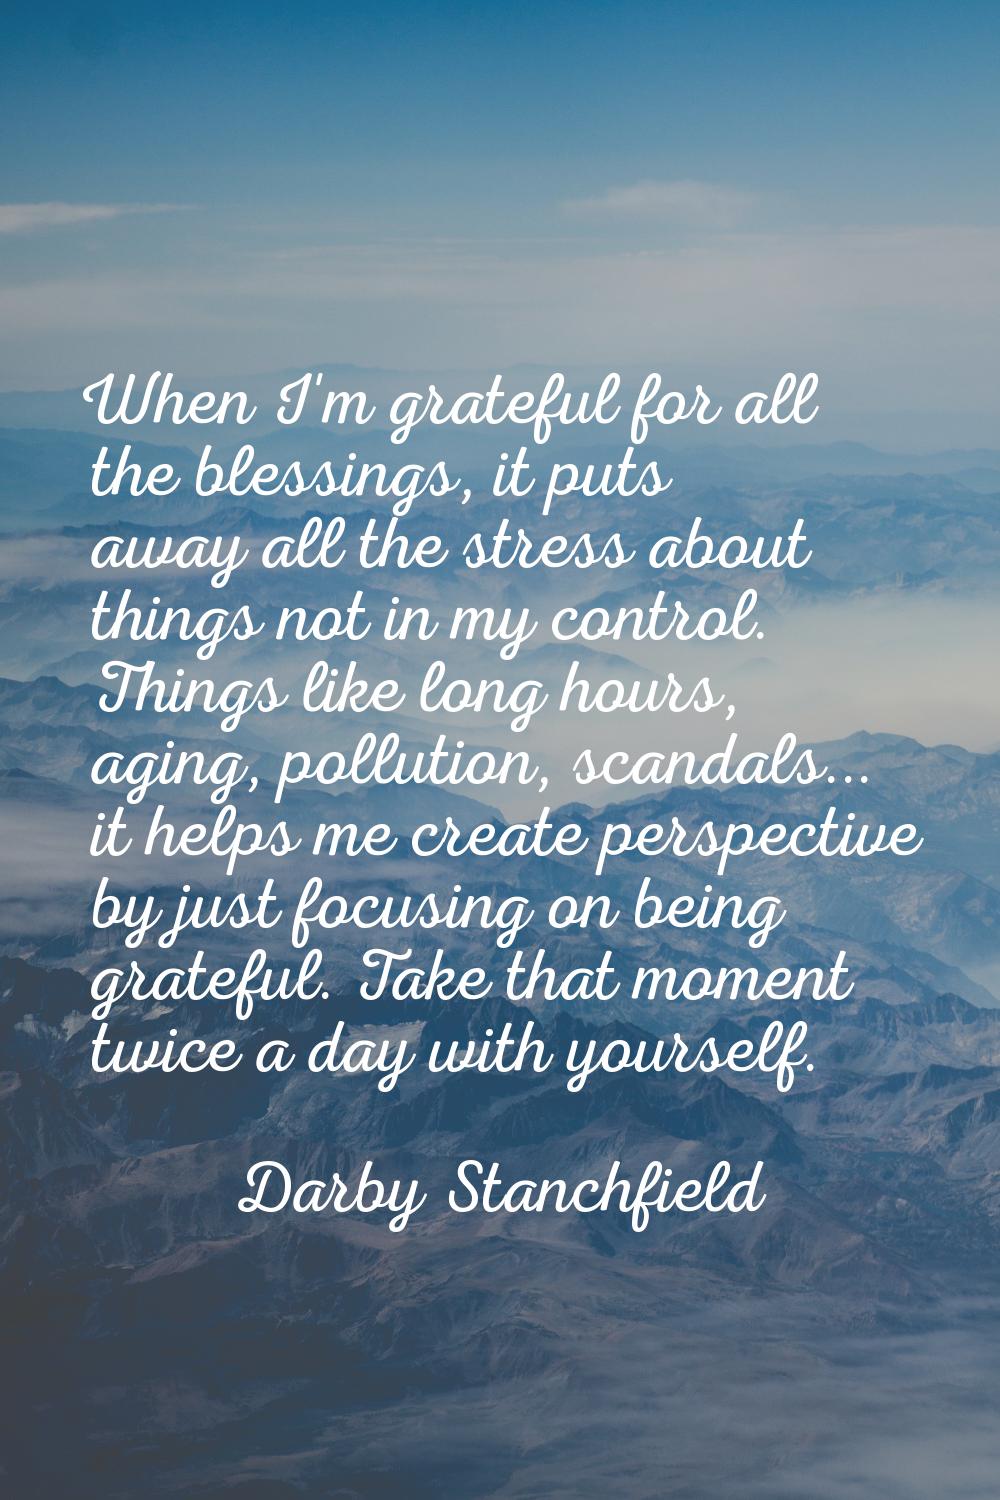 When I'm grateful for all the blessings, it puts away all the stress about things not in my control